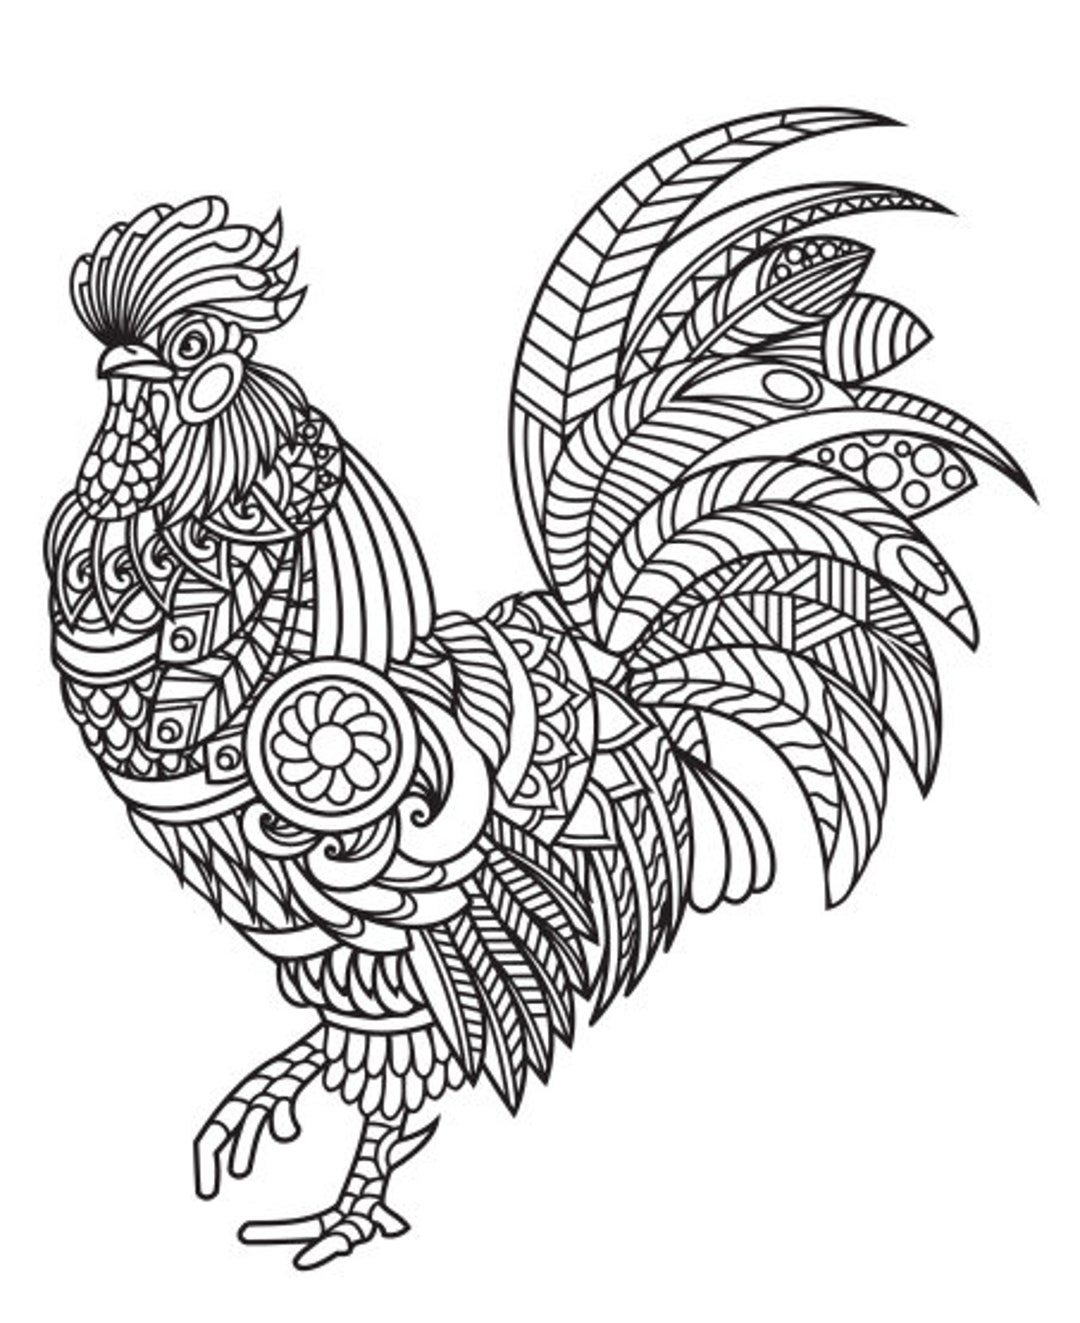 Rooster mandala coloring page